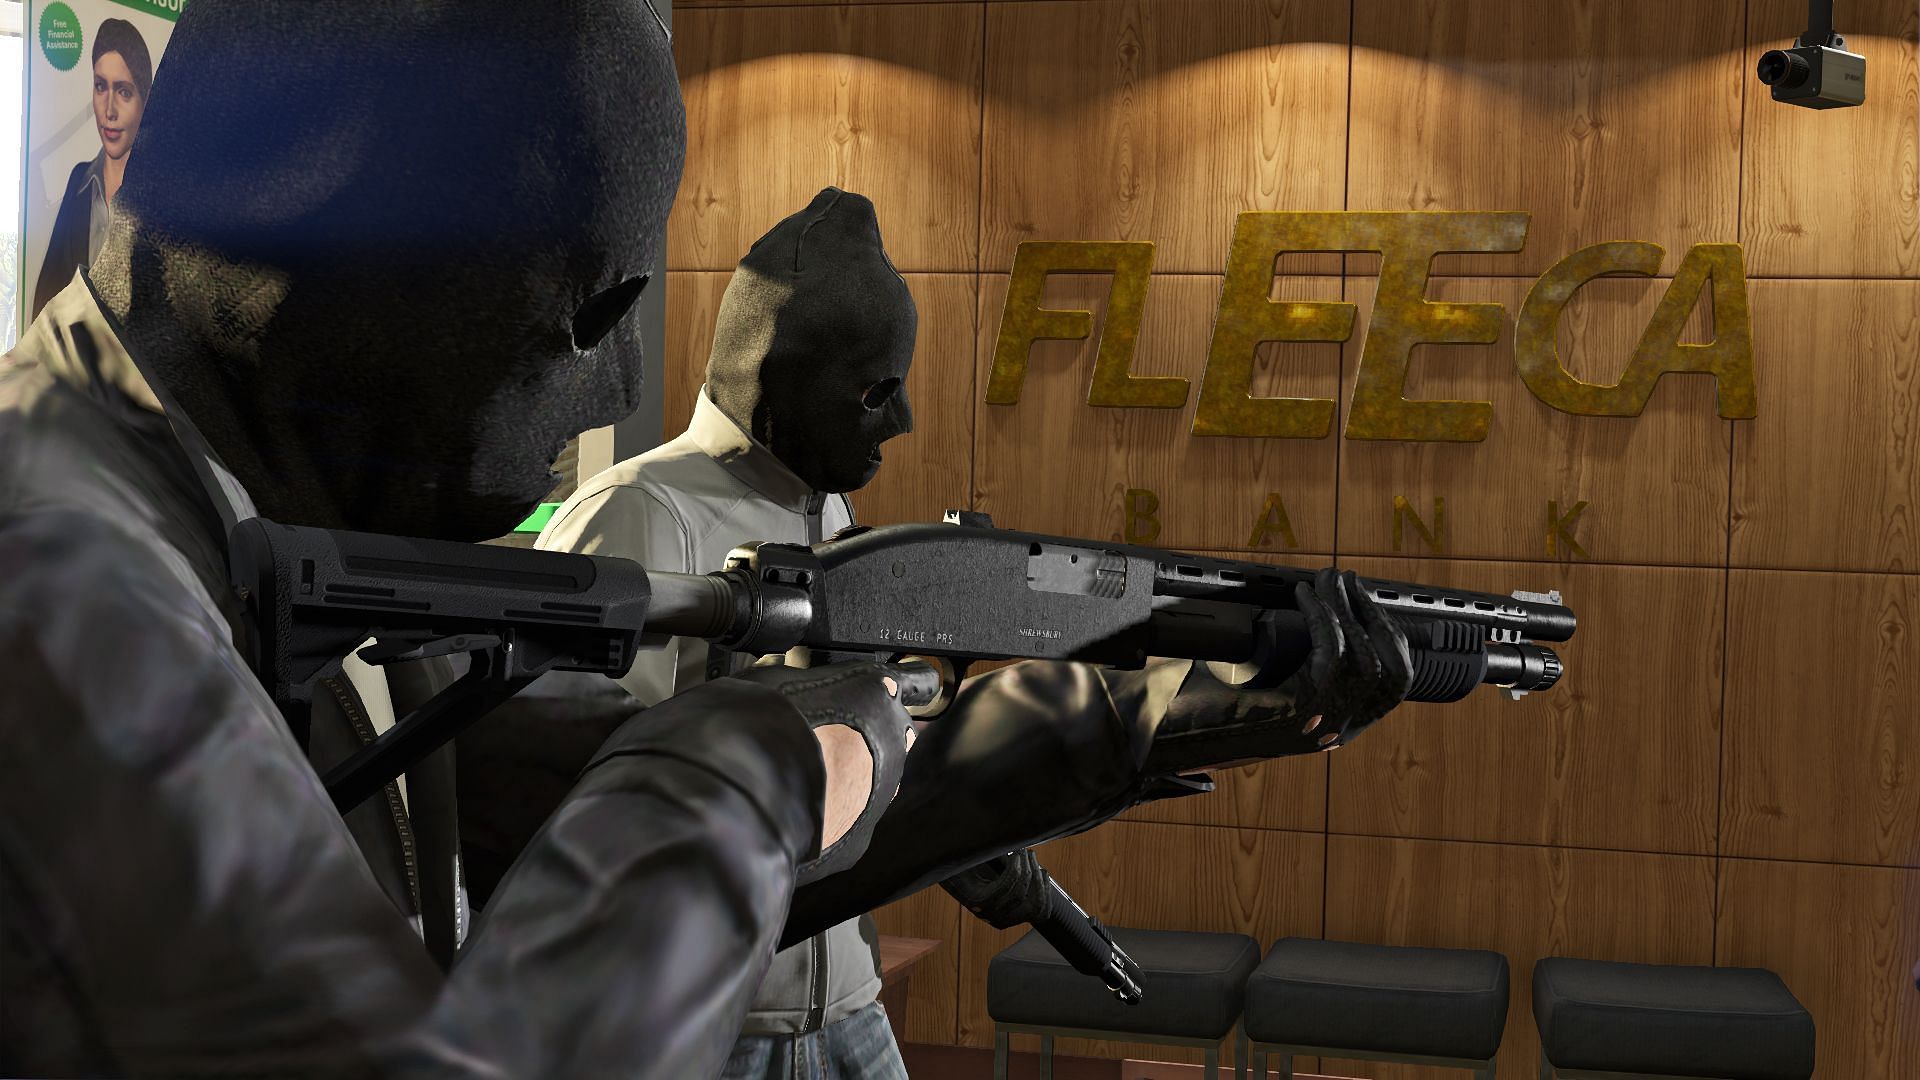 How many heists are in GTA Online?